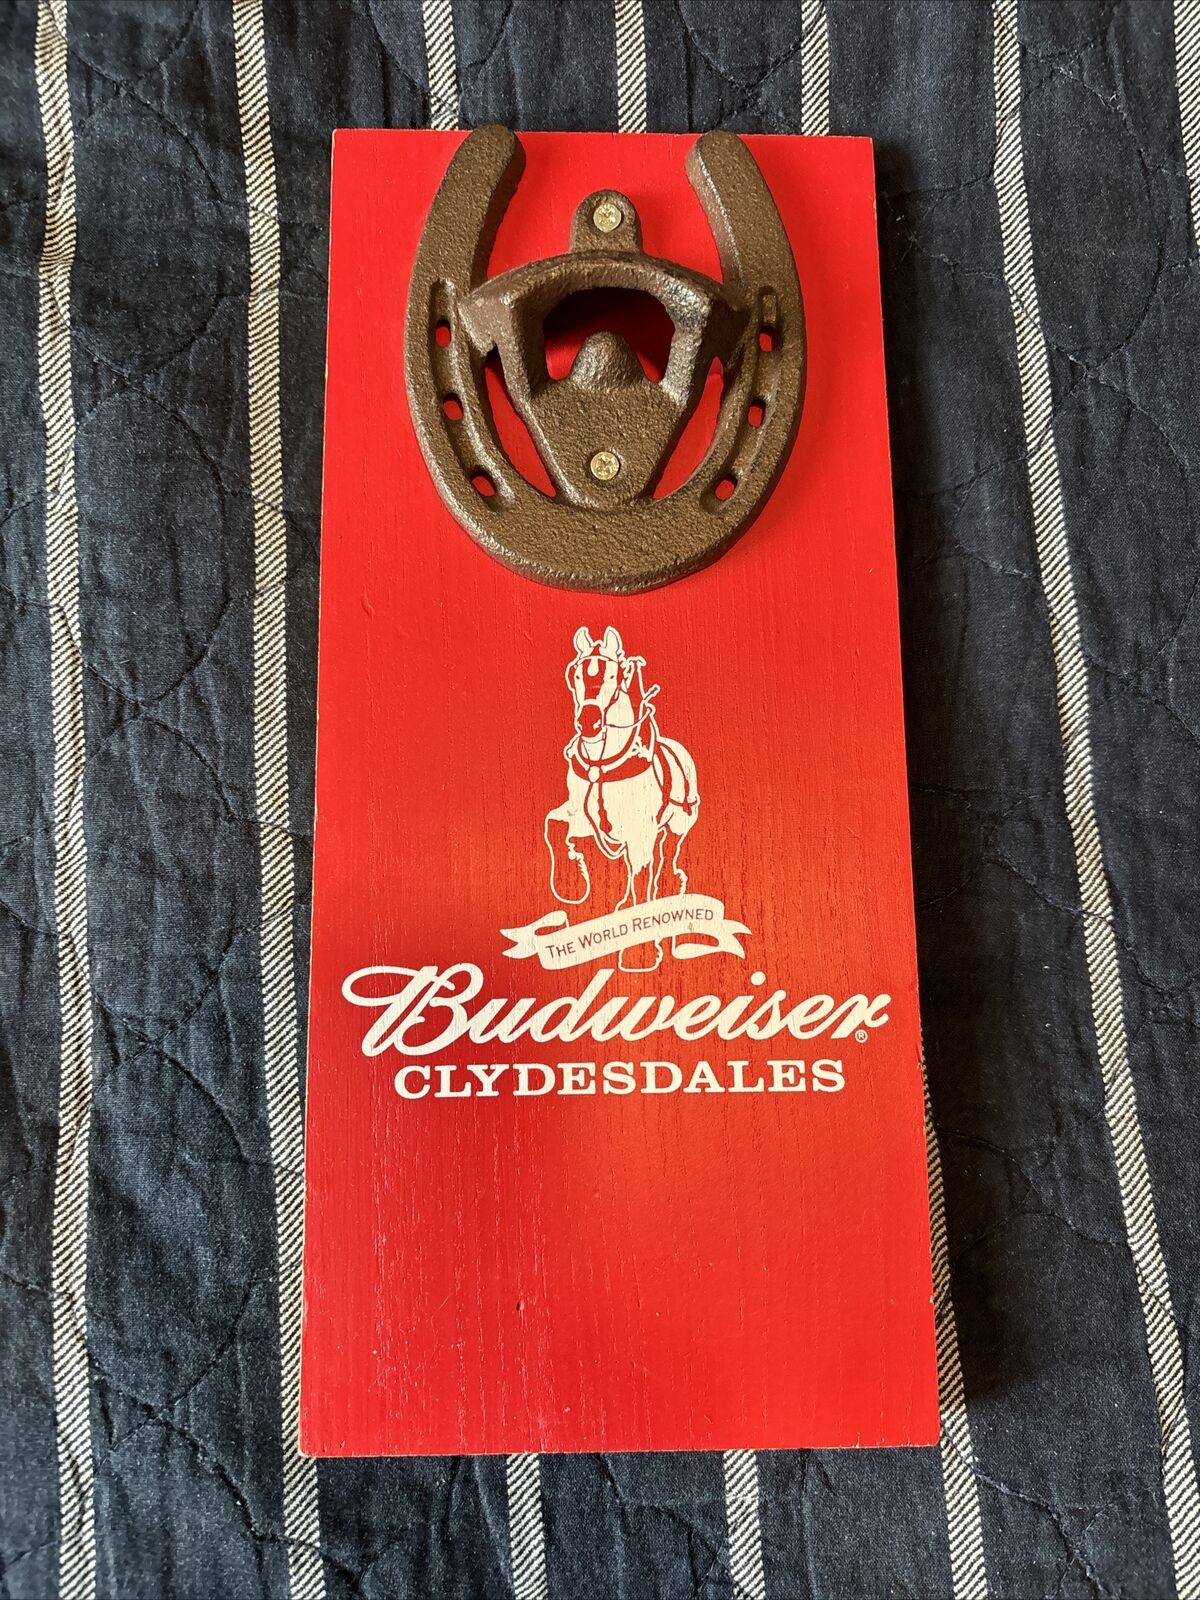 Budweiser Clydesdales Red Wall Mount Cast Iron Horseshoe Bottle Opener Plaque.